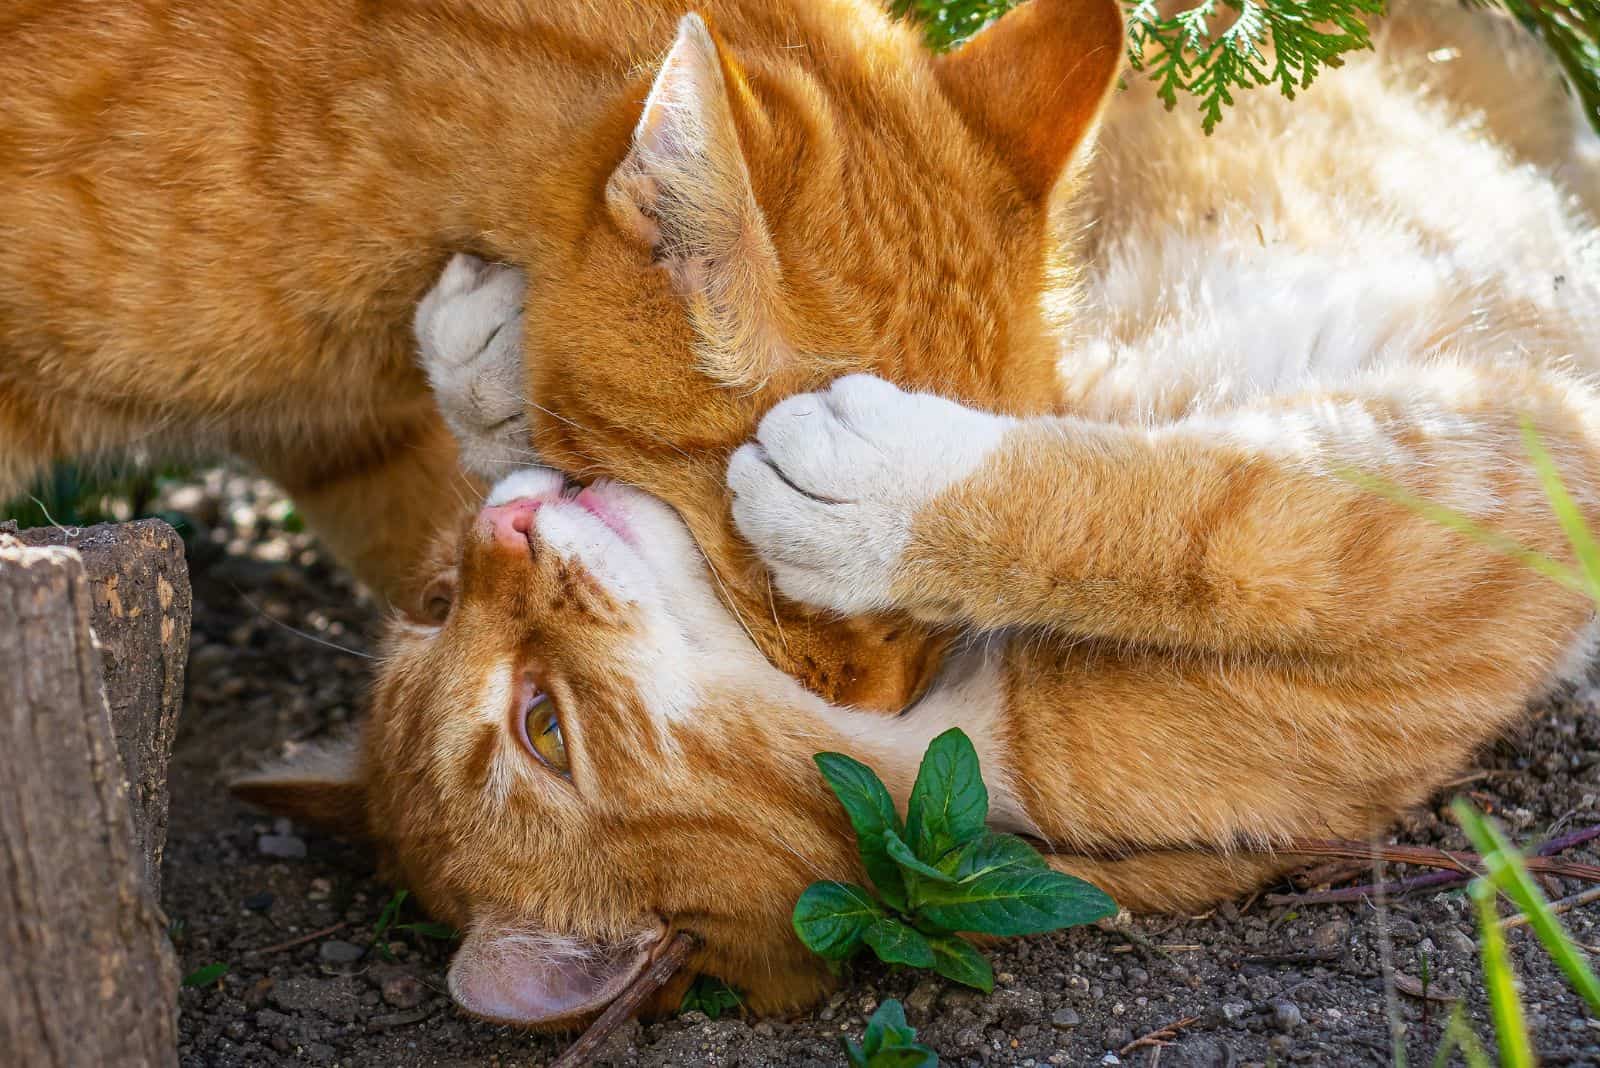 Two ginger cats are playing by biting each other's necks